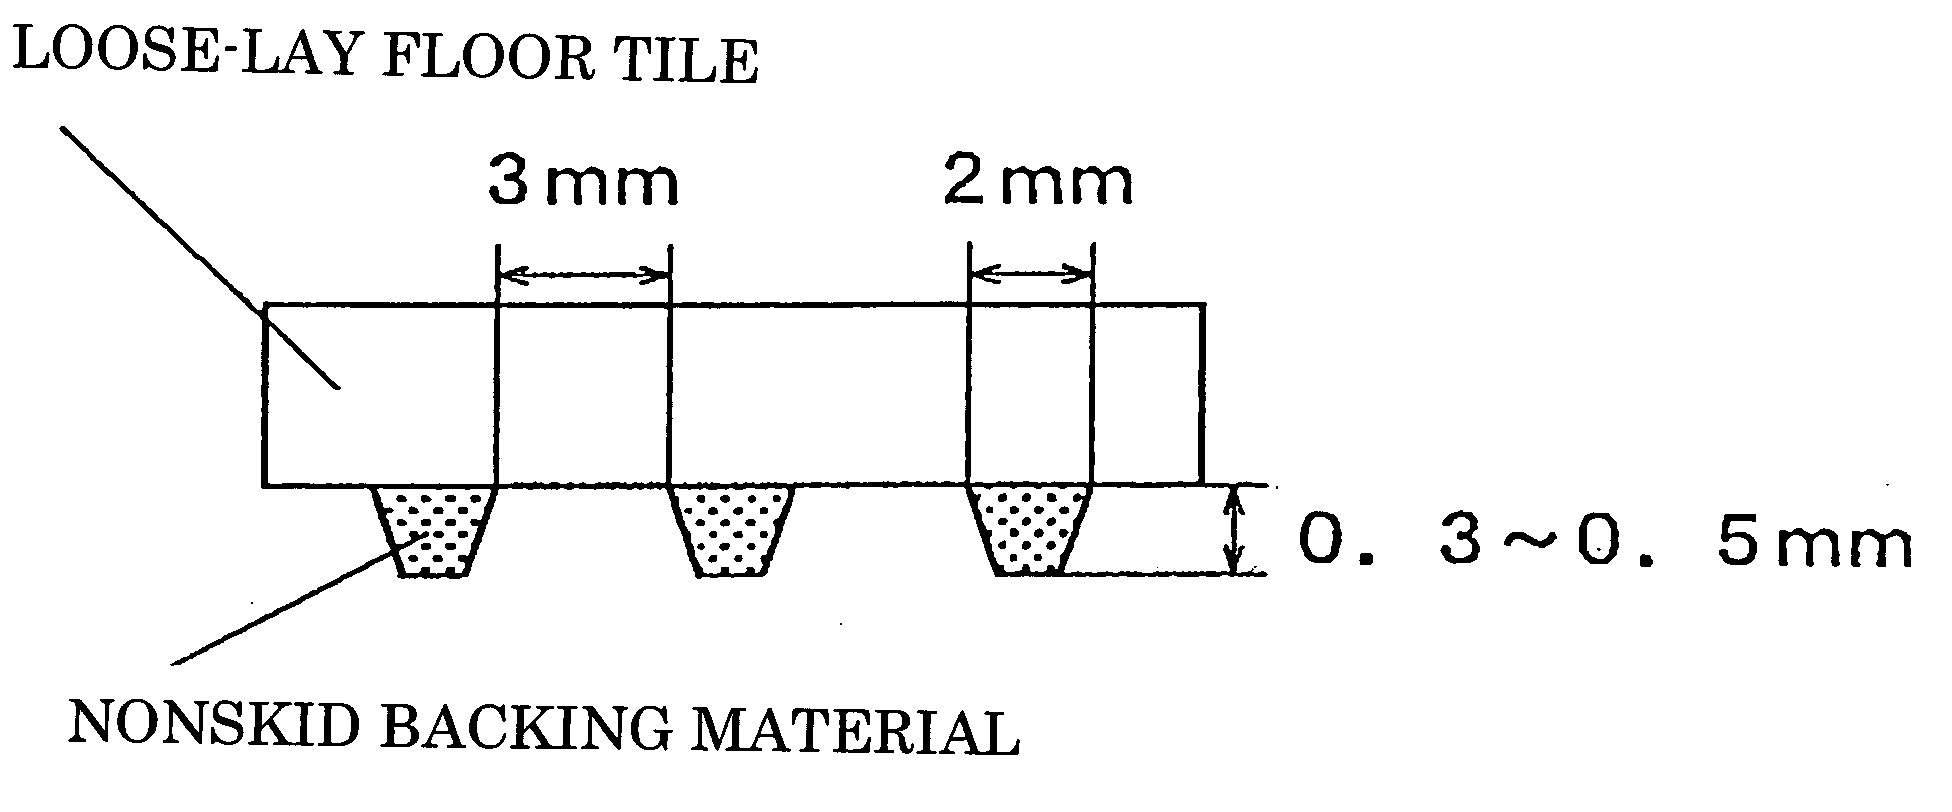 Free laying floor tile having pvc based backing material for preventing tile from slipping provided on back surface thereof